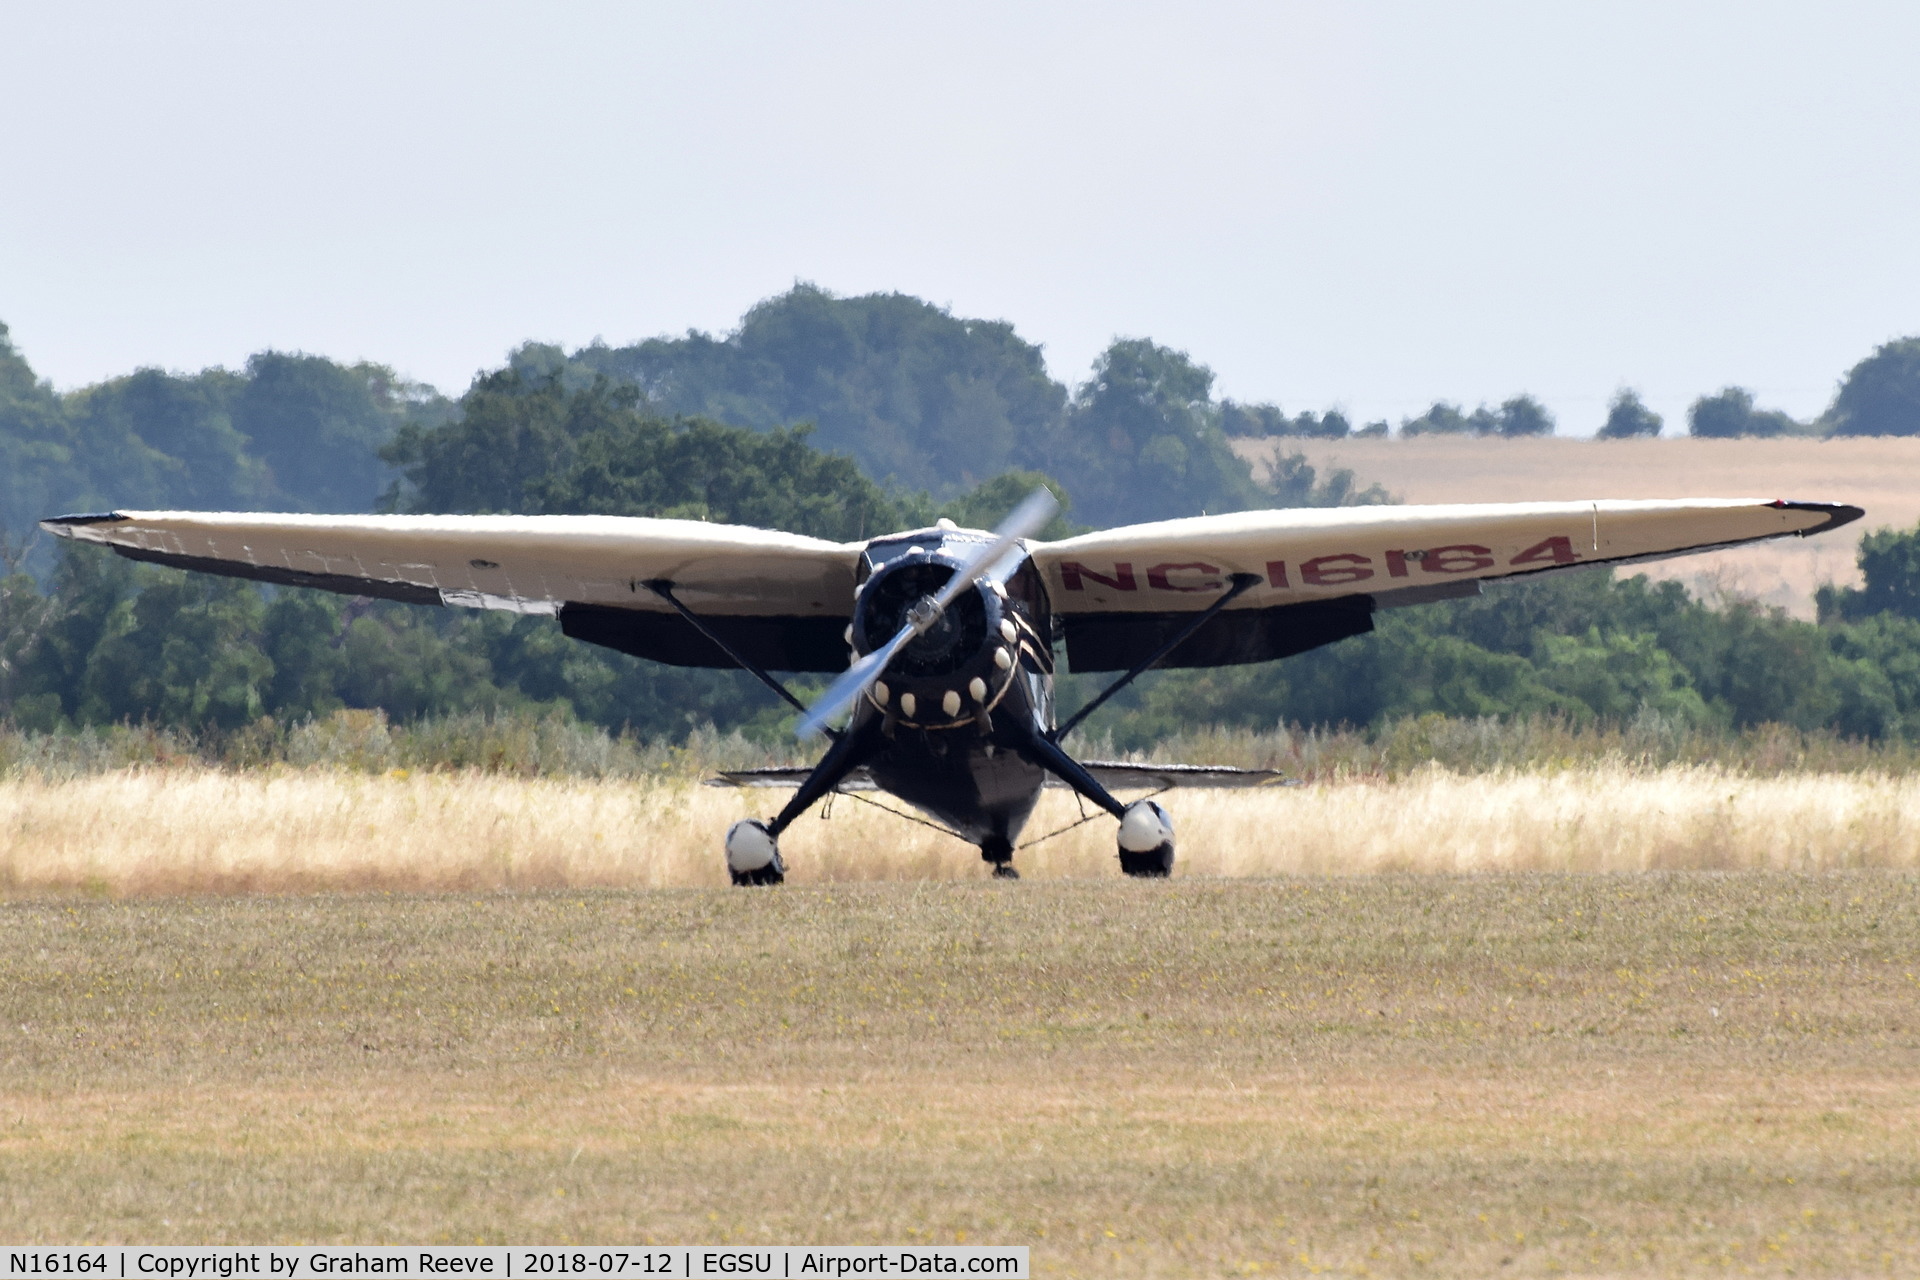 N16164, 1936 Stinson SR-8E Reliant C/N 9737, Just landed at Duxford.